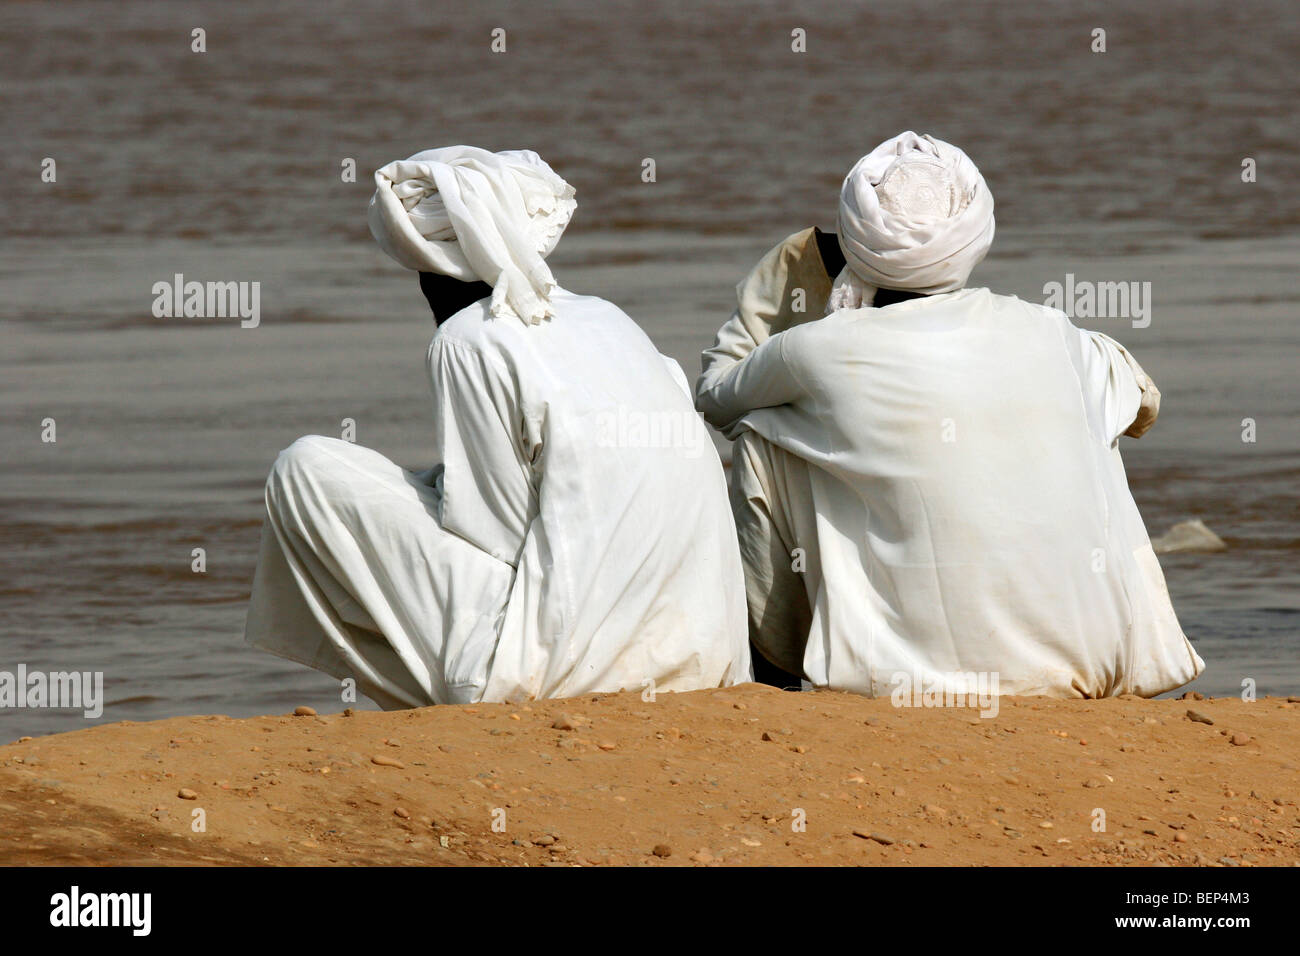 Two Nubian men dressed in white thawbs / thobes / dishdashas sitting on riverbank of the river Nile, Sudan, North Africa Stock Photo